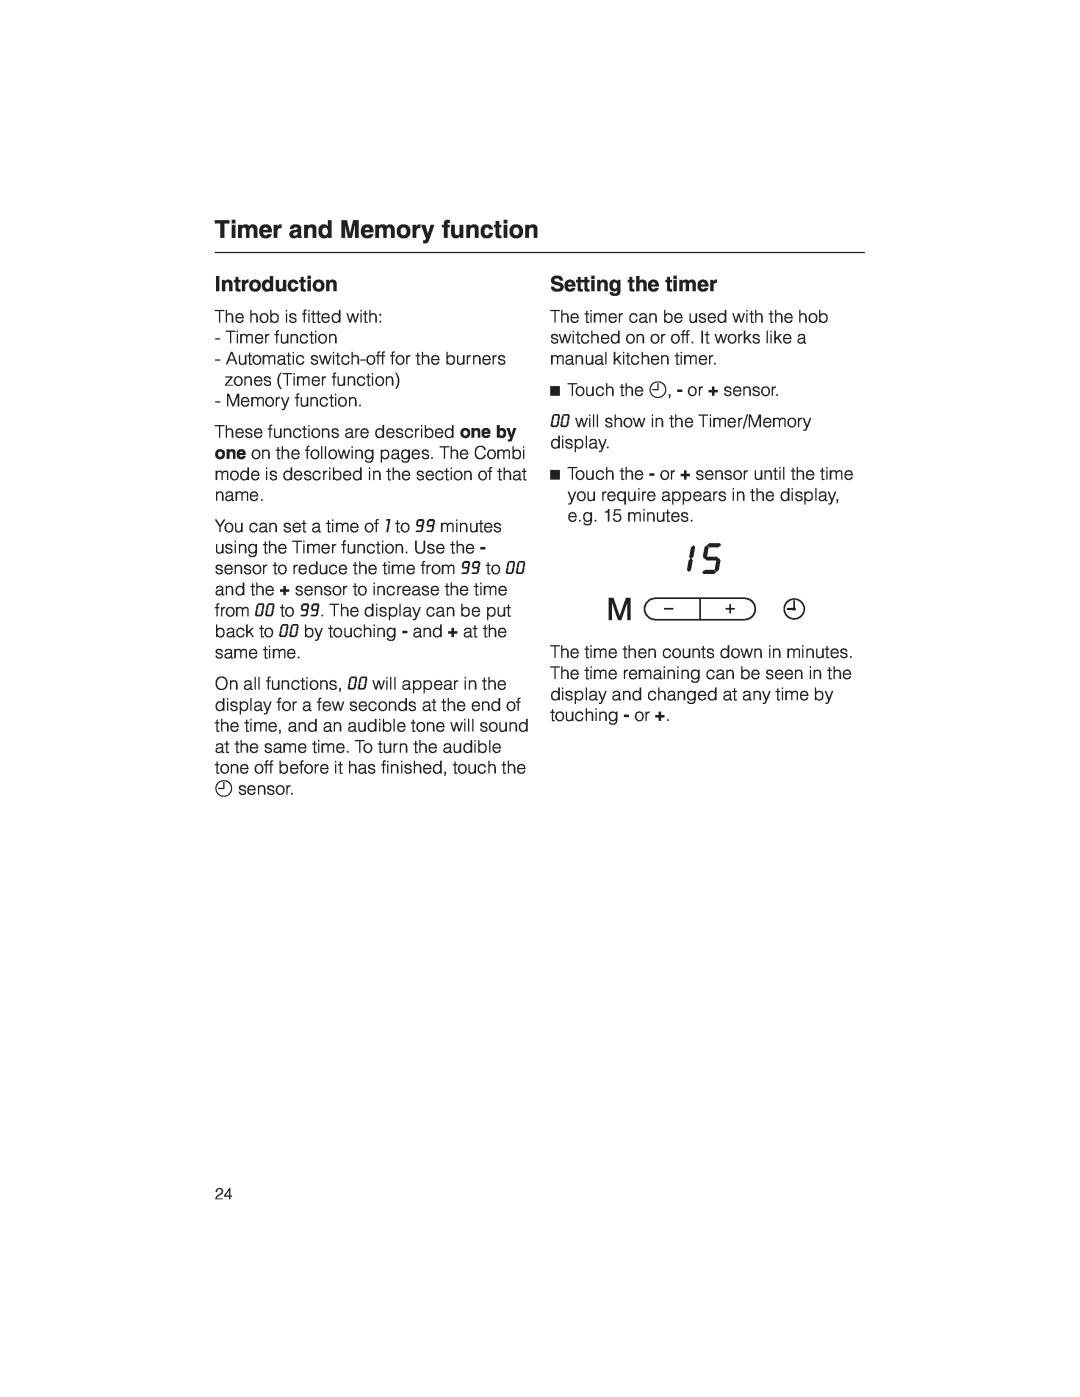 Miele KM 5773 installation instructions Timer and Memory function, Introduction, Setting the timer 